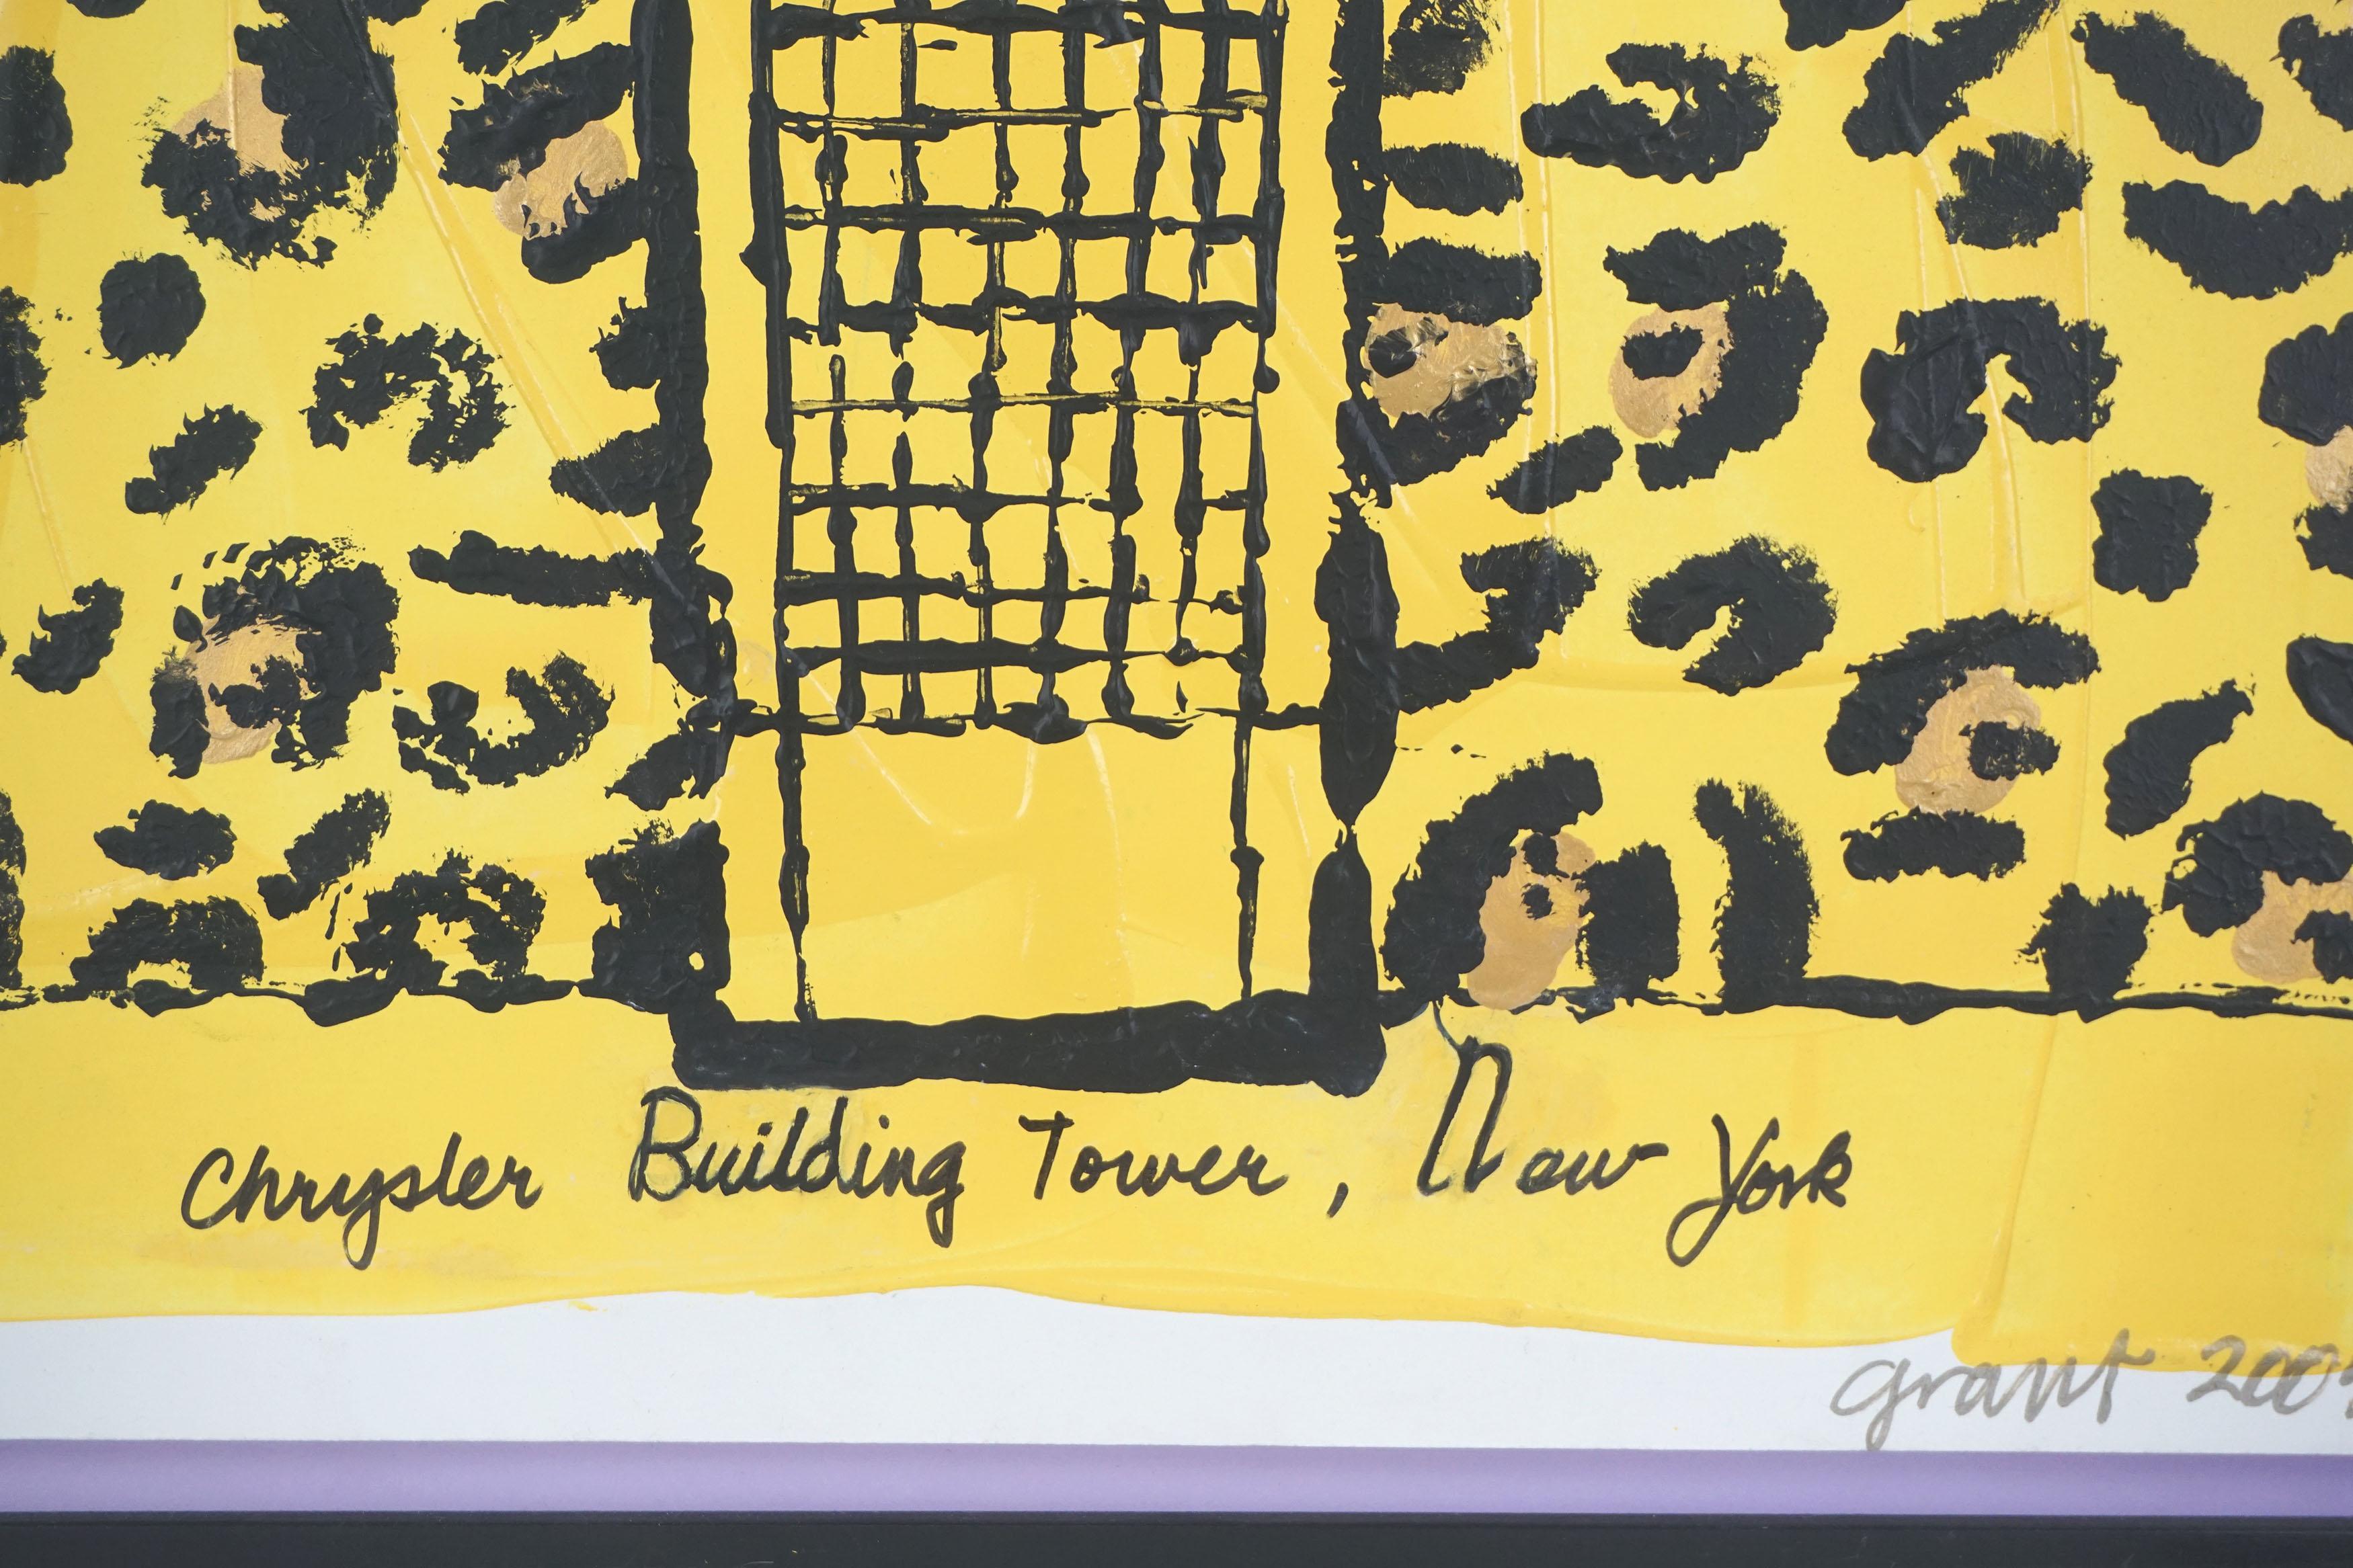 Playful pop art style depiction of the Chrysler Building Tower in New York on a yellow/metallic gold leopard print background by Marc Foster Grant (American, b. 1947). The building on handmade paper with yellow and gold metallic paint, so the color